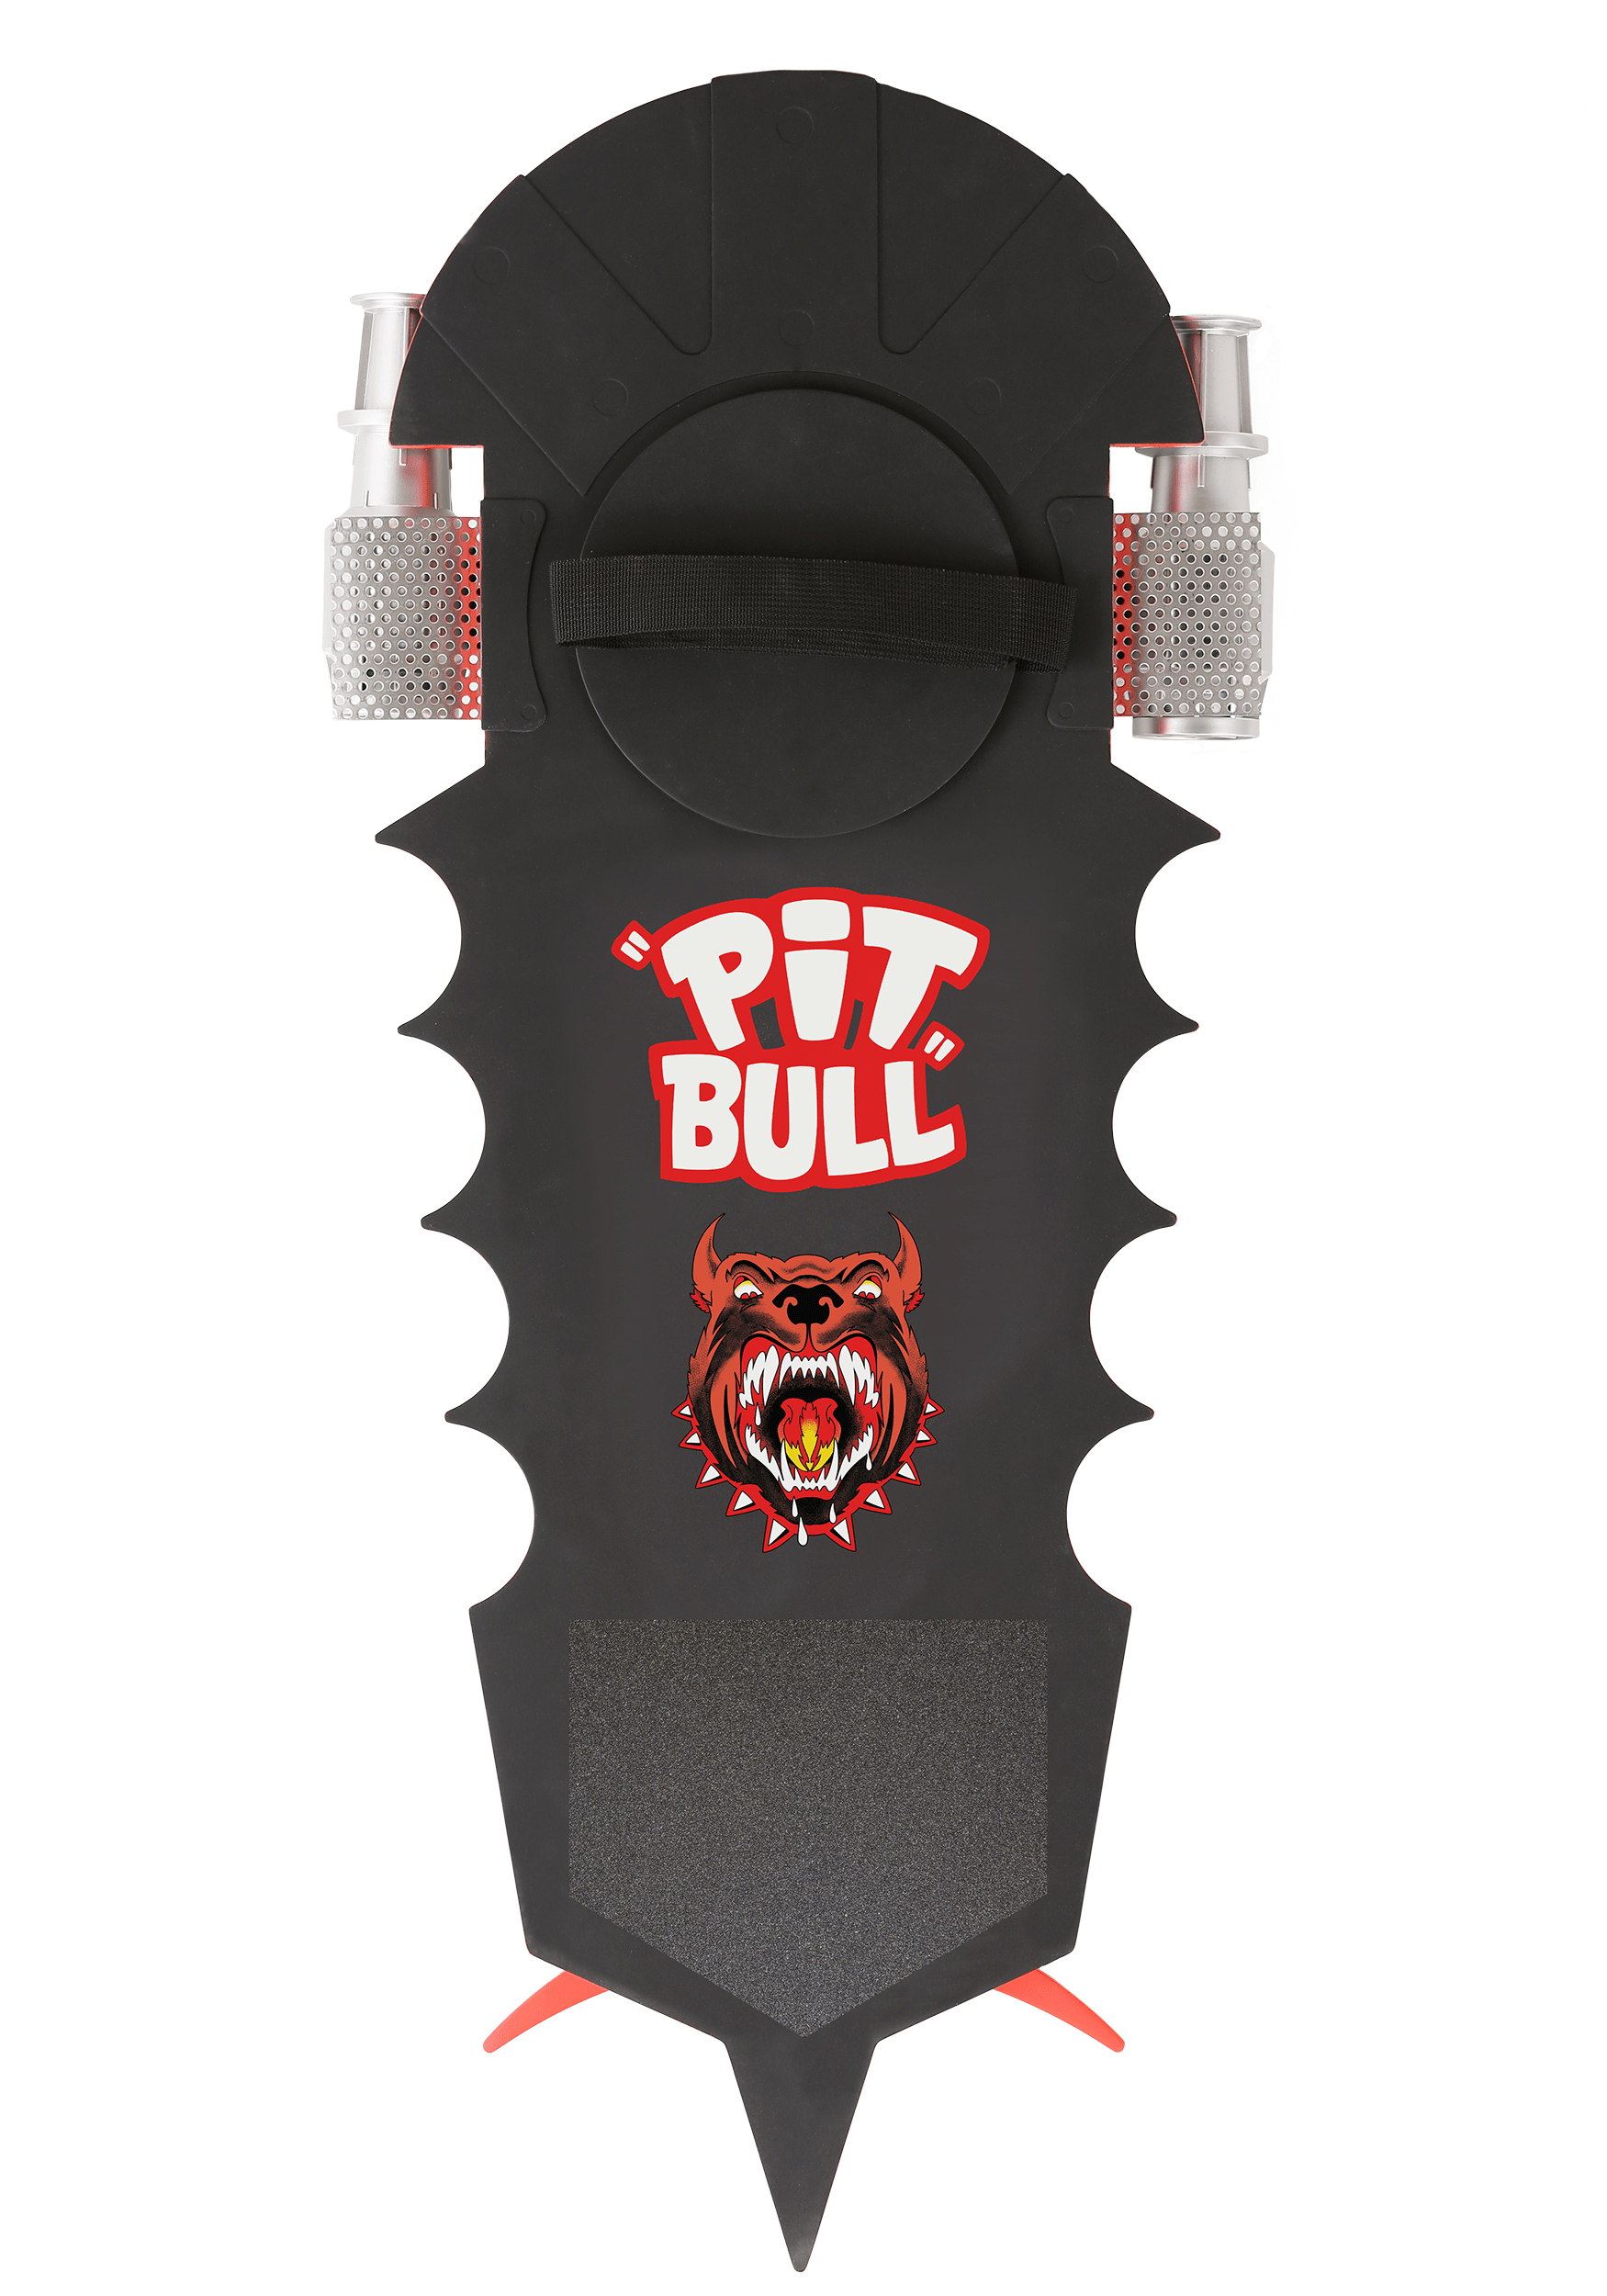 Griff's Pitbull Hoverboard From Back To The Future II